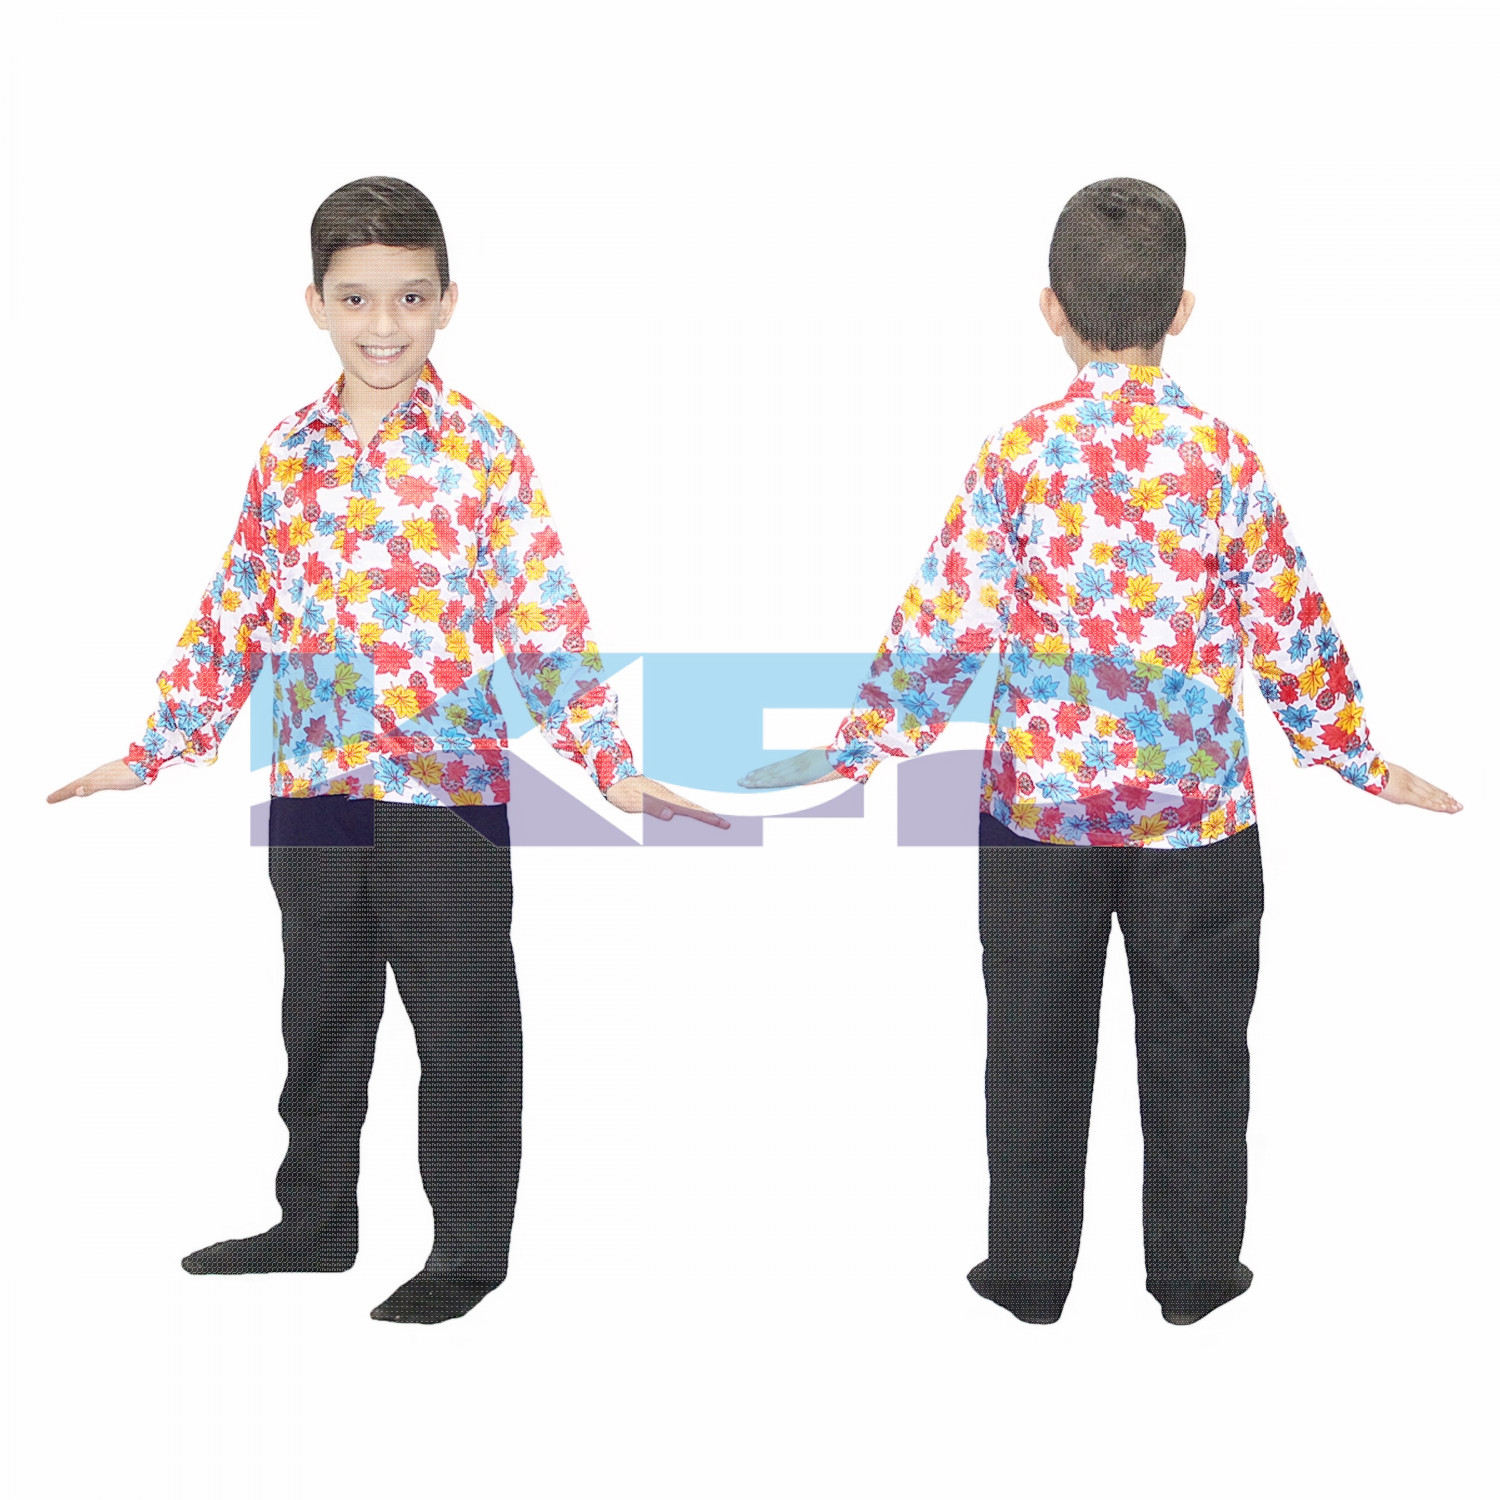 Flower Print Shirt fancy dress for kids,Western Costume for School Annual function/Theme Party/Competition/Stage Shows/Birthday Party Dress laten dance/salsa dance